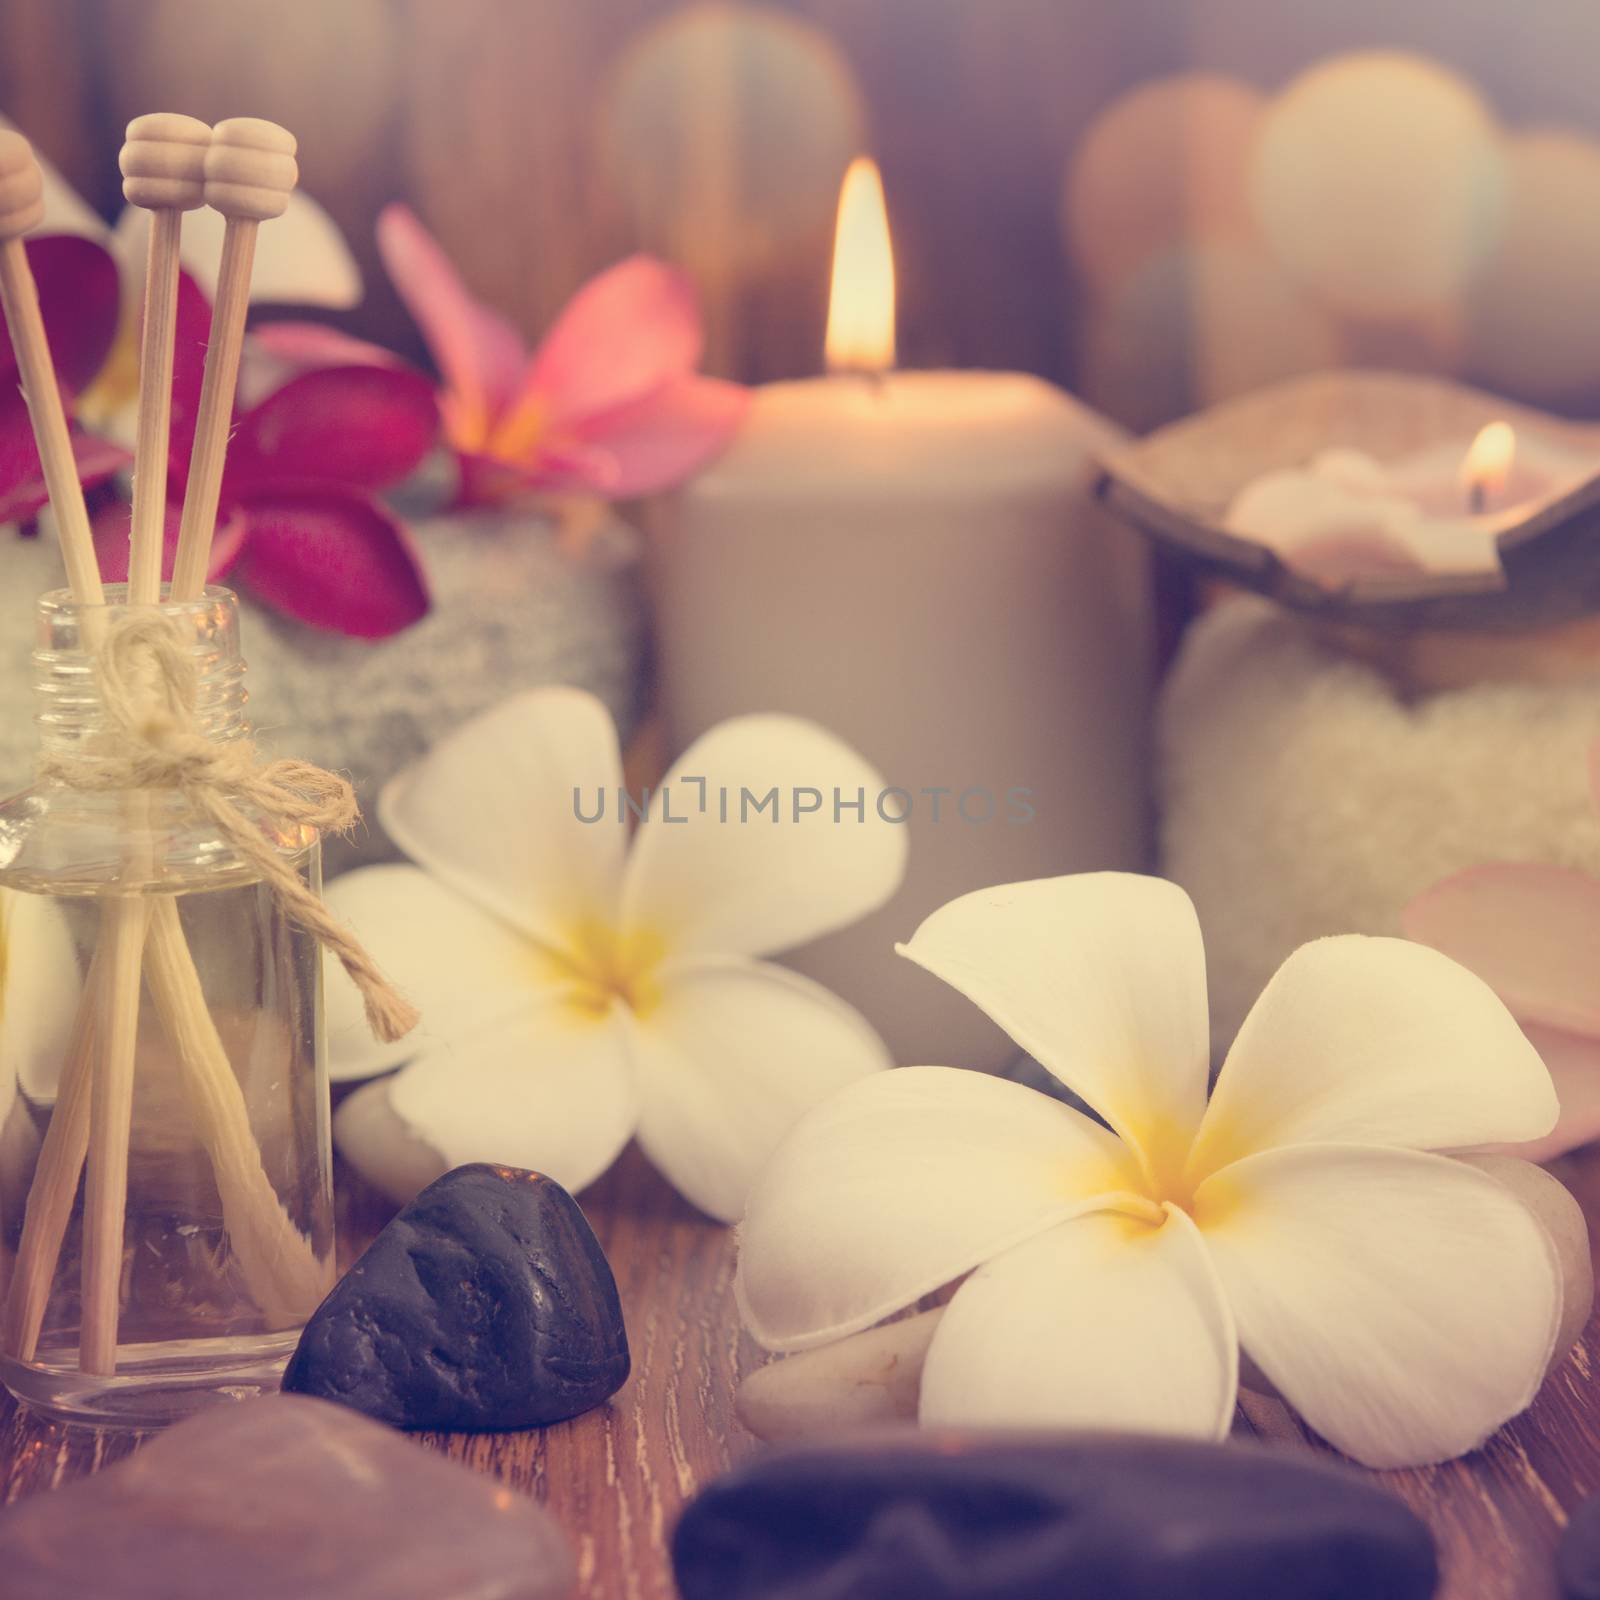 Wellness and spa concept with candles, frangipani flower, sandalwood and rattan sticks on massage table in vintage retro style.